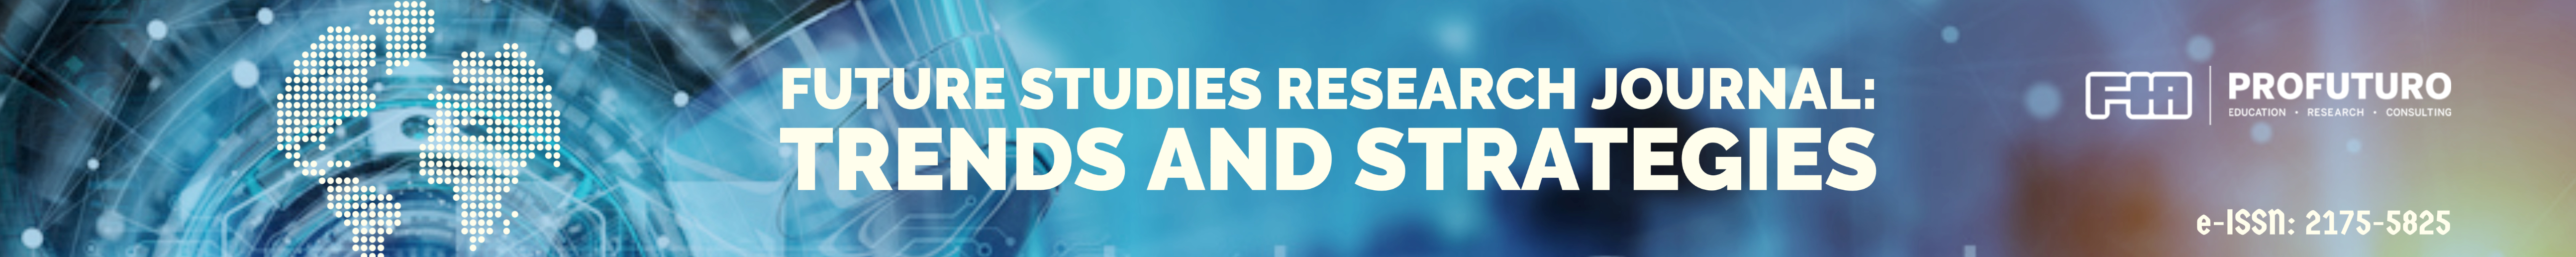 future studies research journal trends and strategies